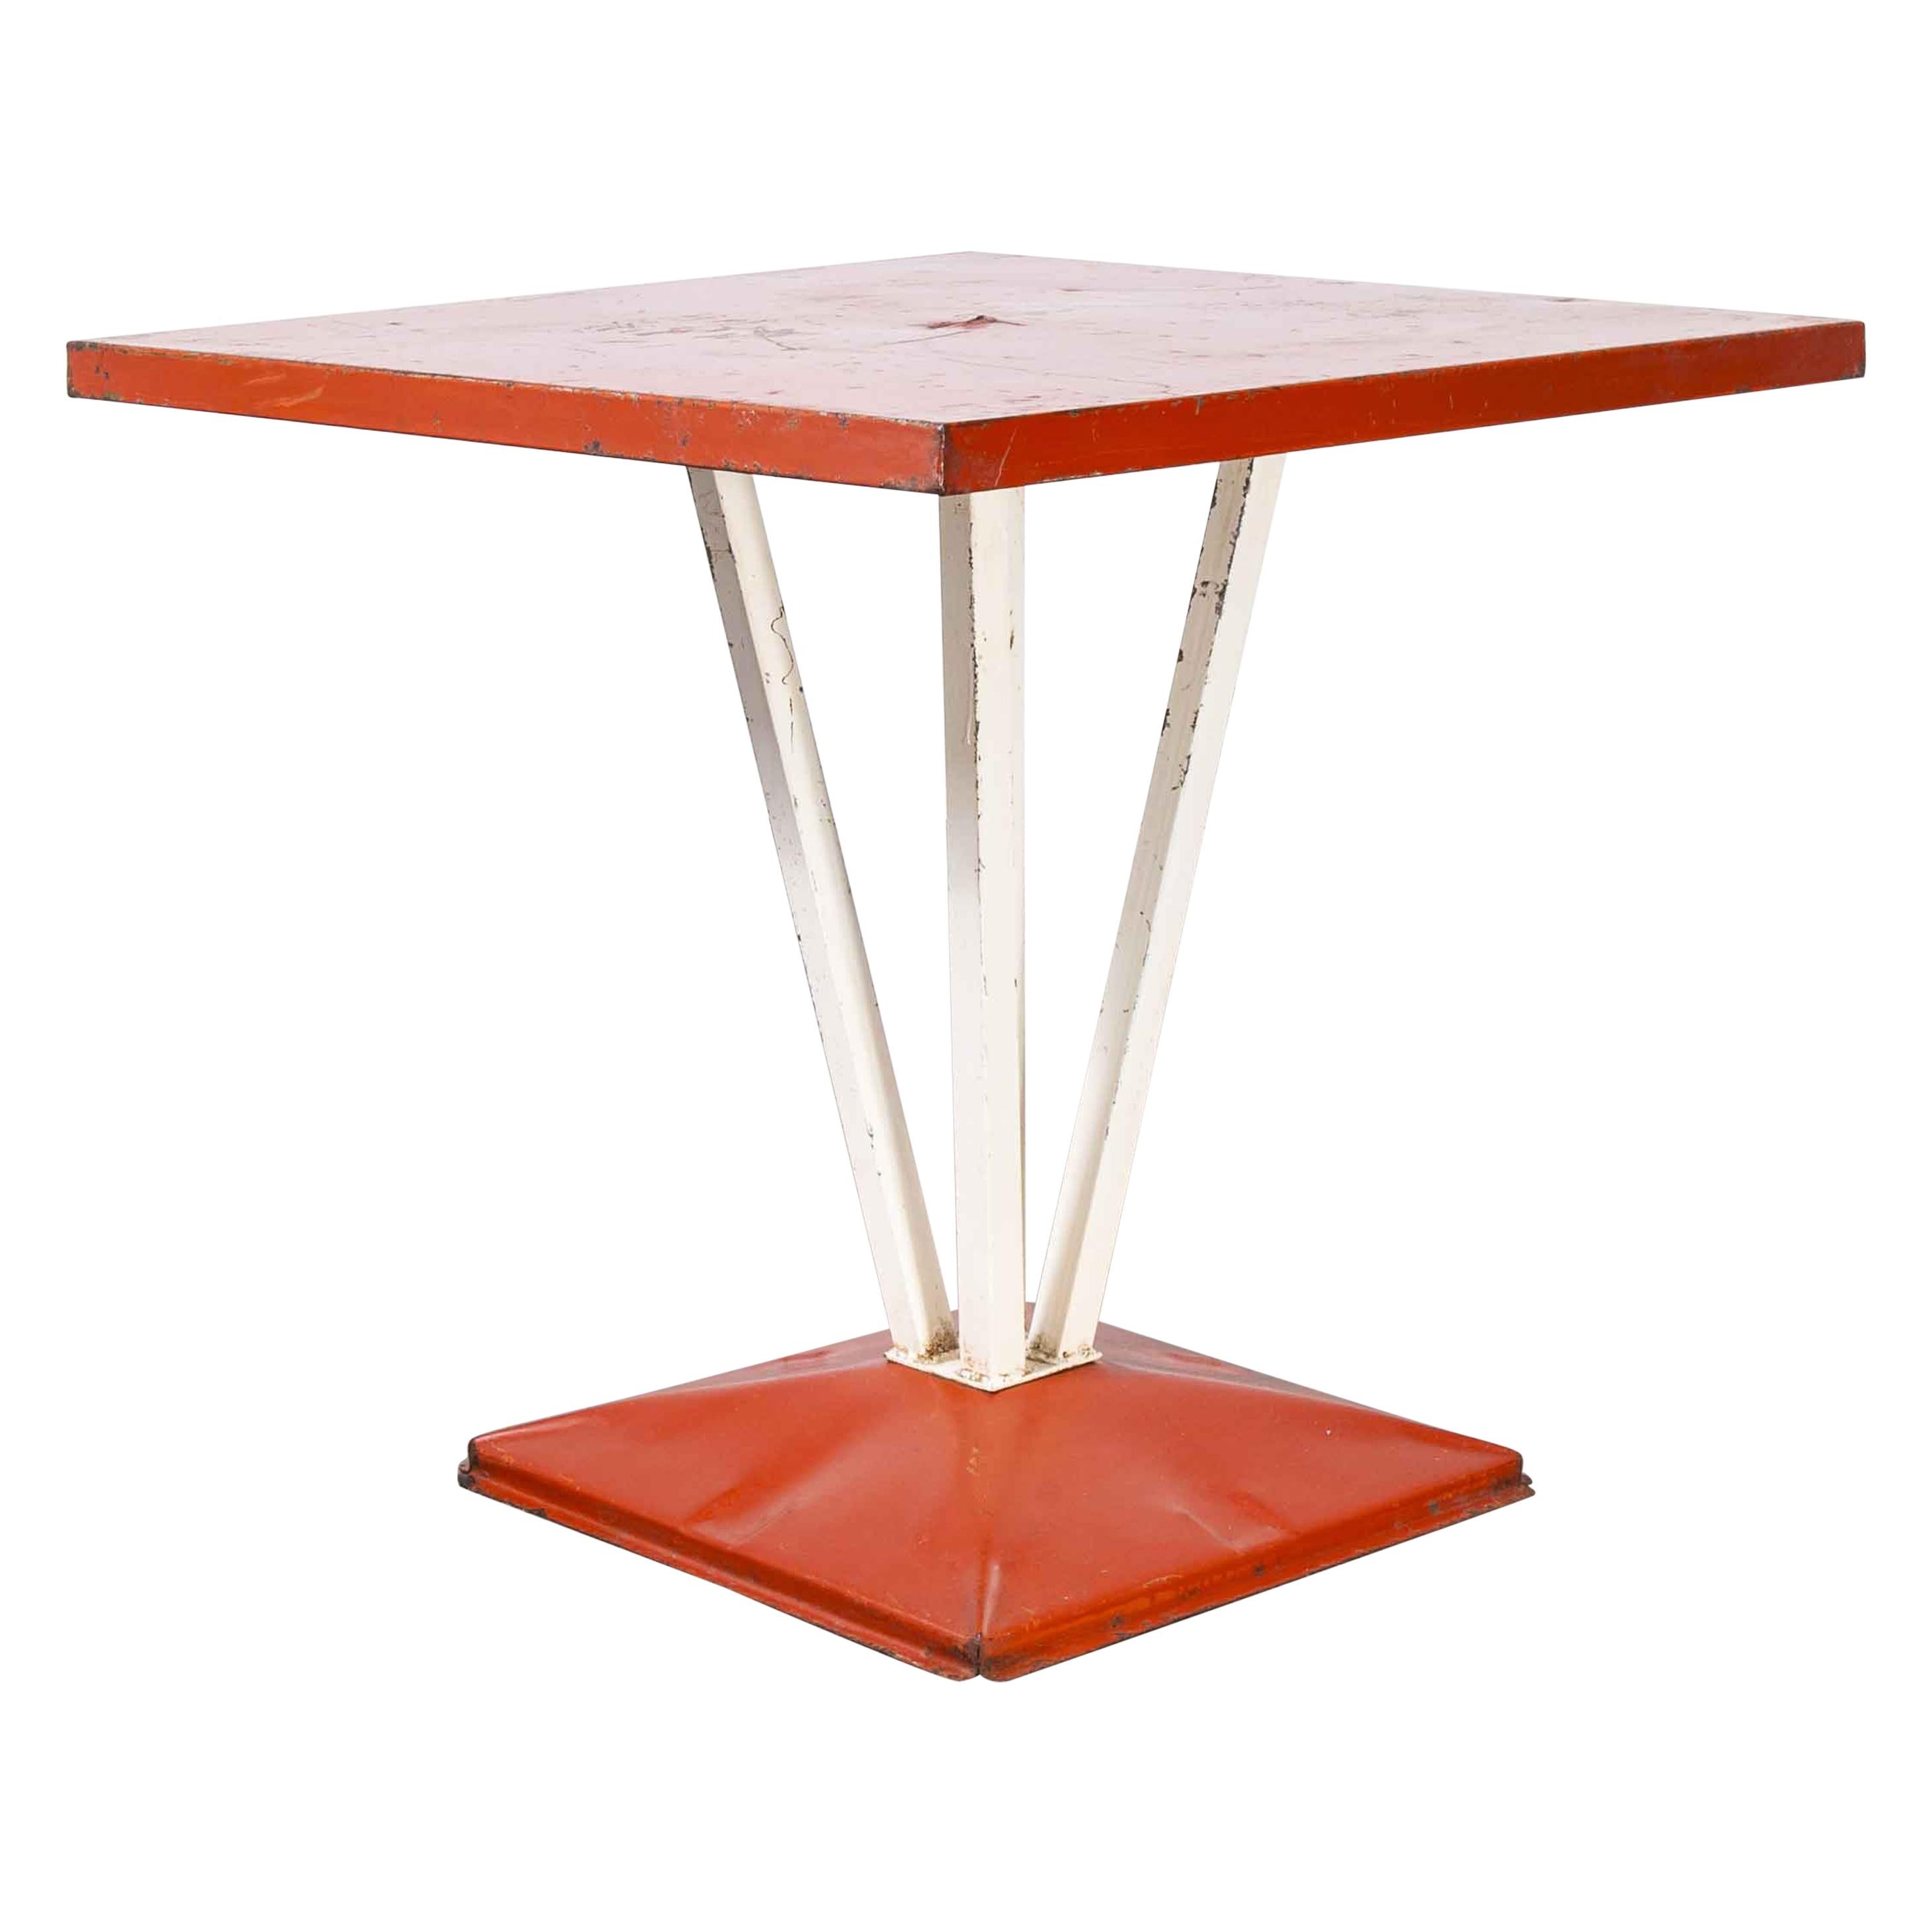 1950's Original French Tolix Outdoor Table, Four Column Base 'Model 1116.1'